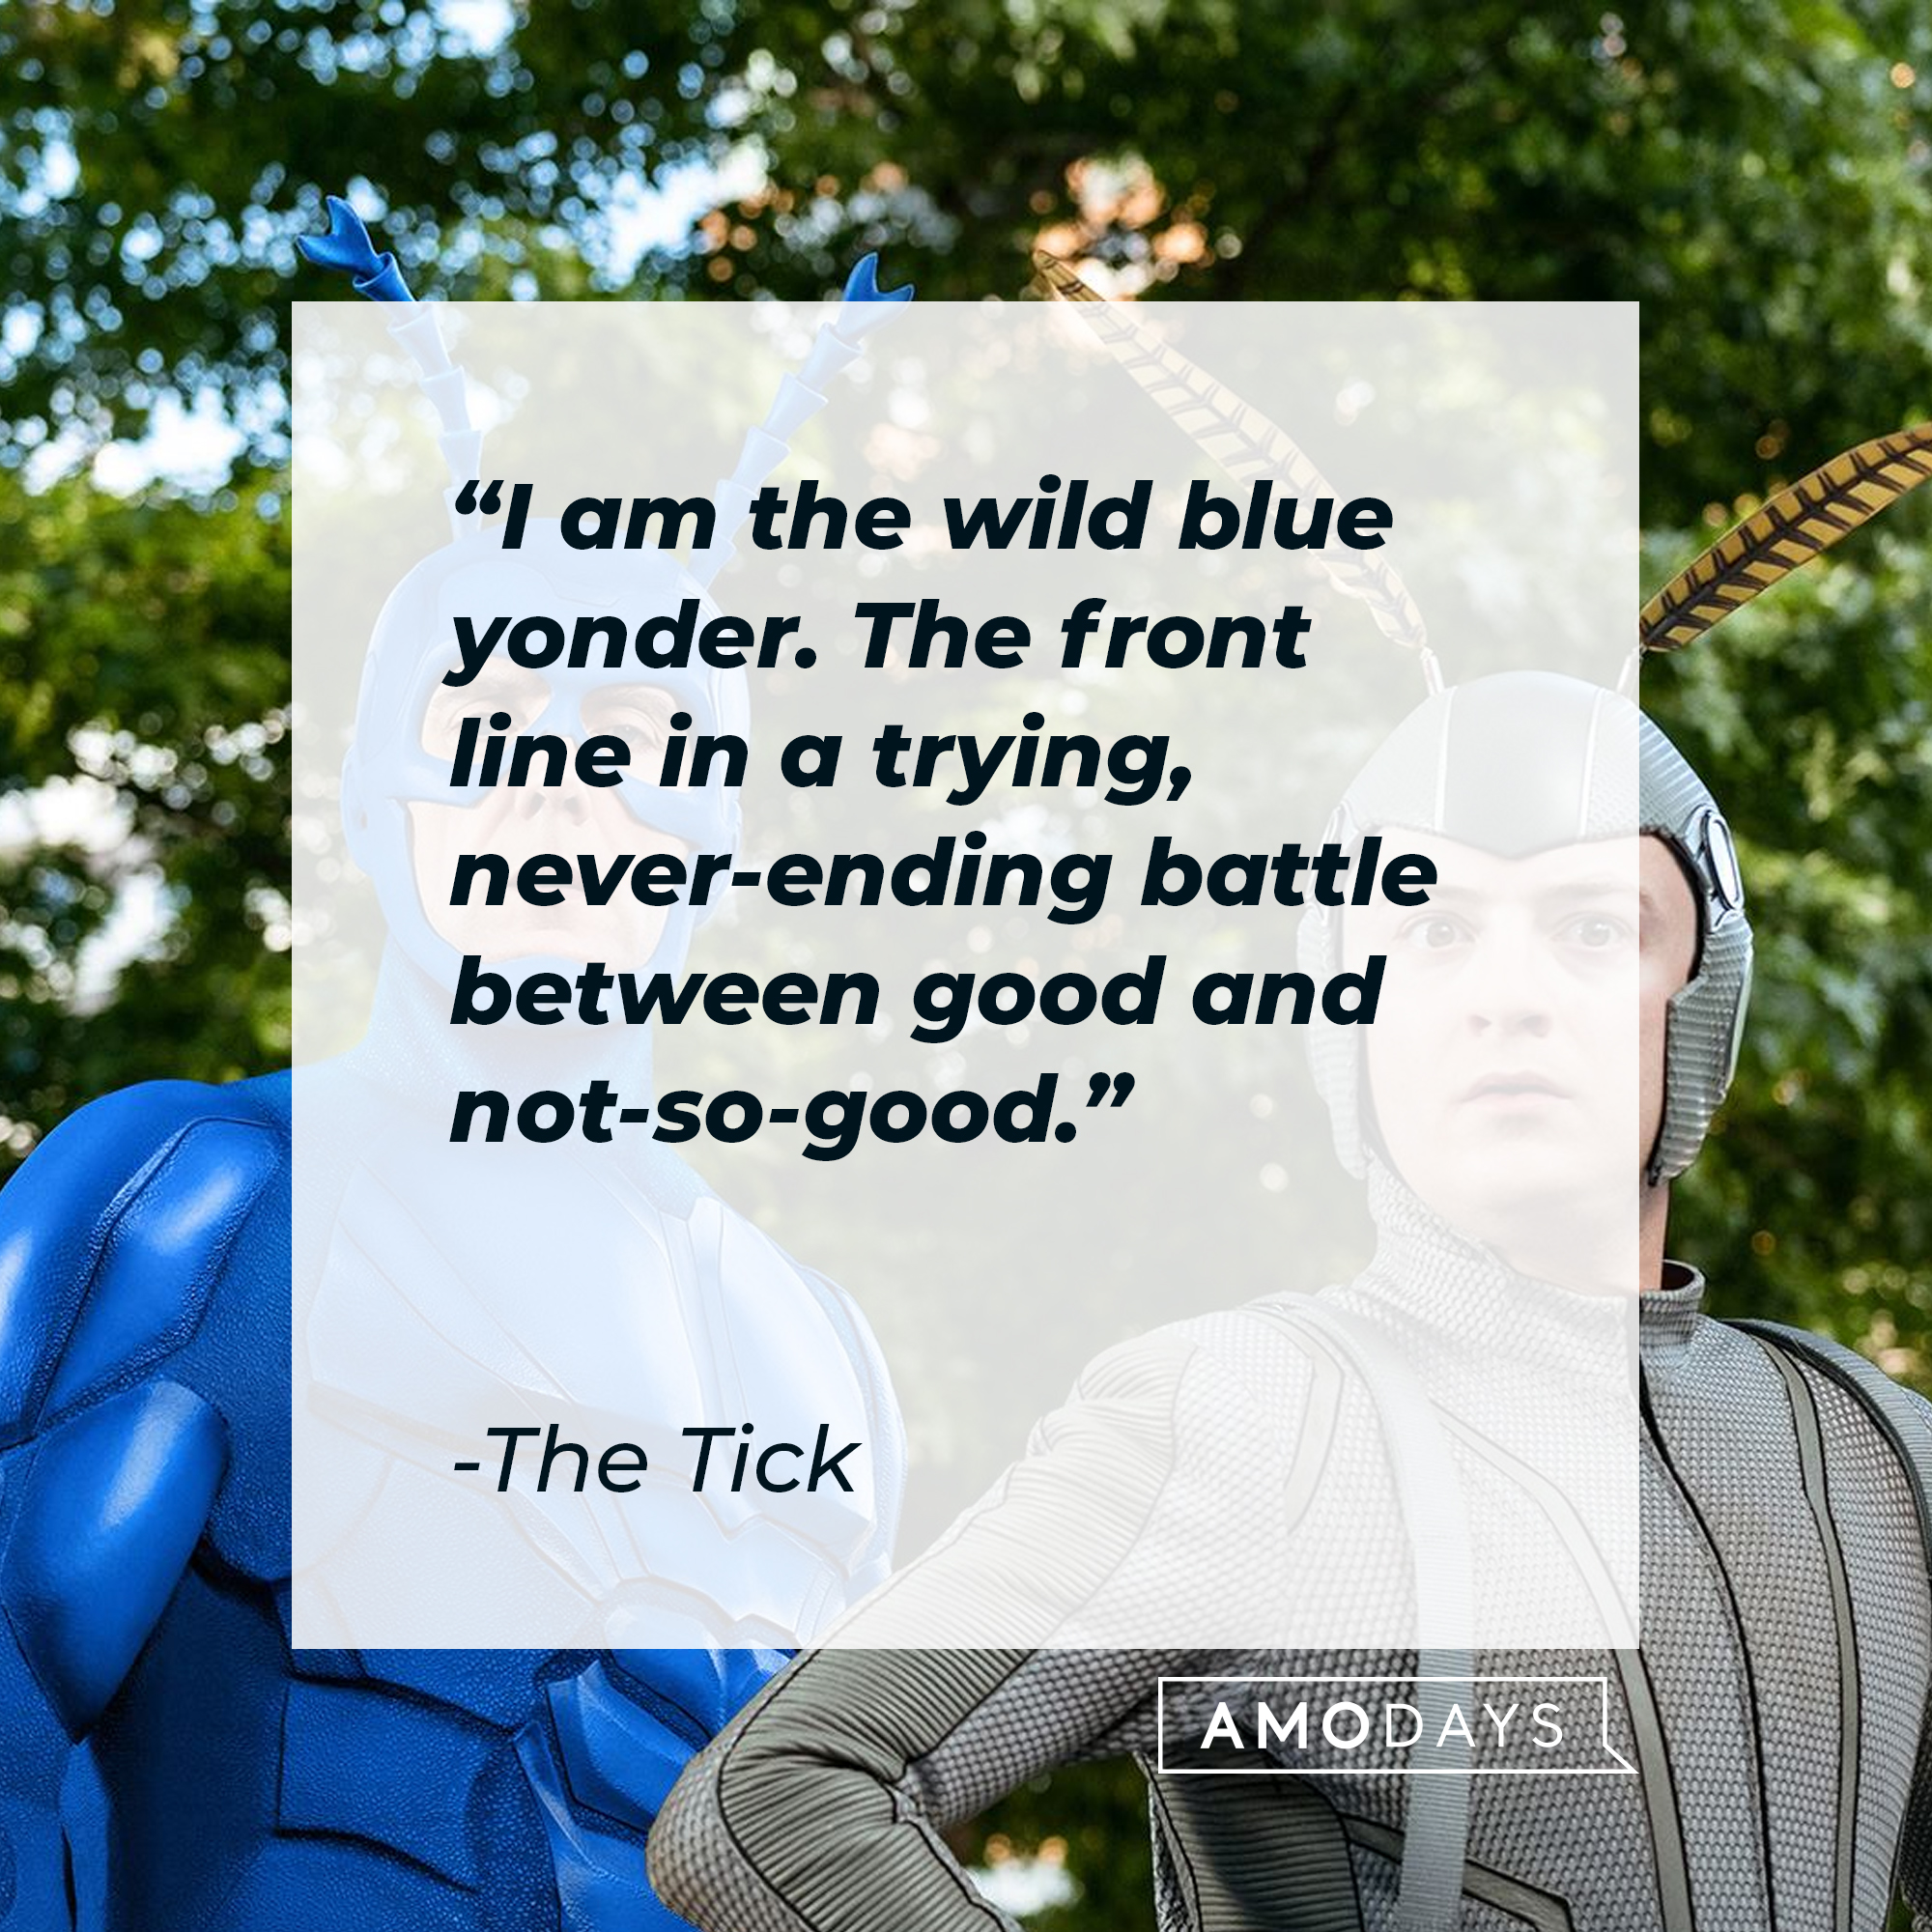 The Tick's quote: "I am the wild blue yonder. The front line in a trying, never-ending battle between good and not-so-good." | Source: Facebook.com/TheTick